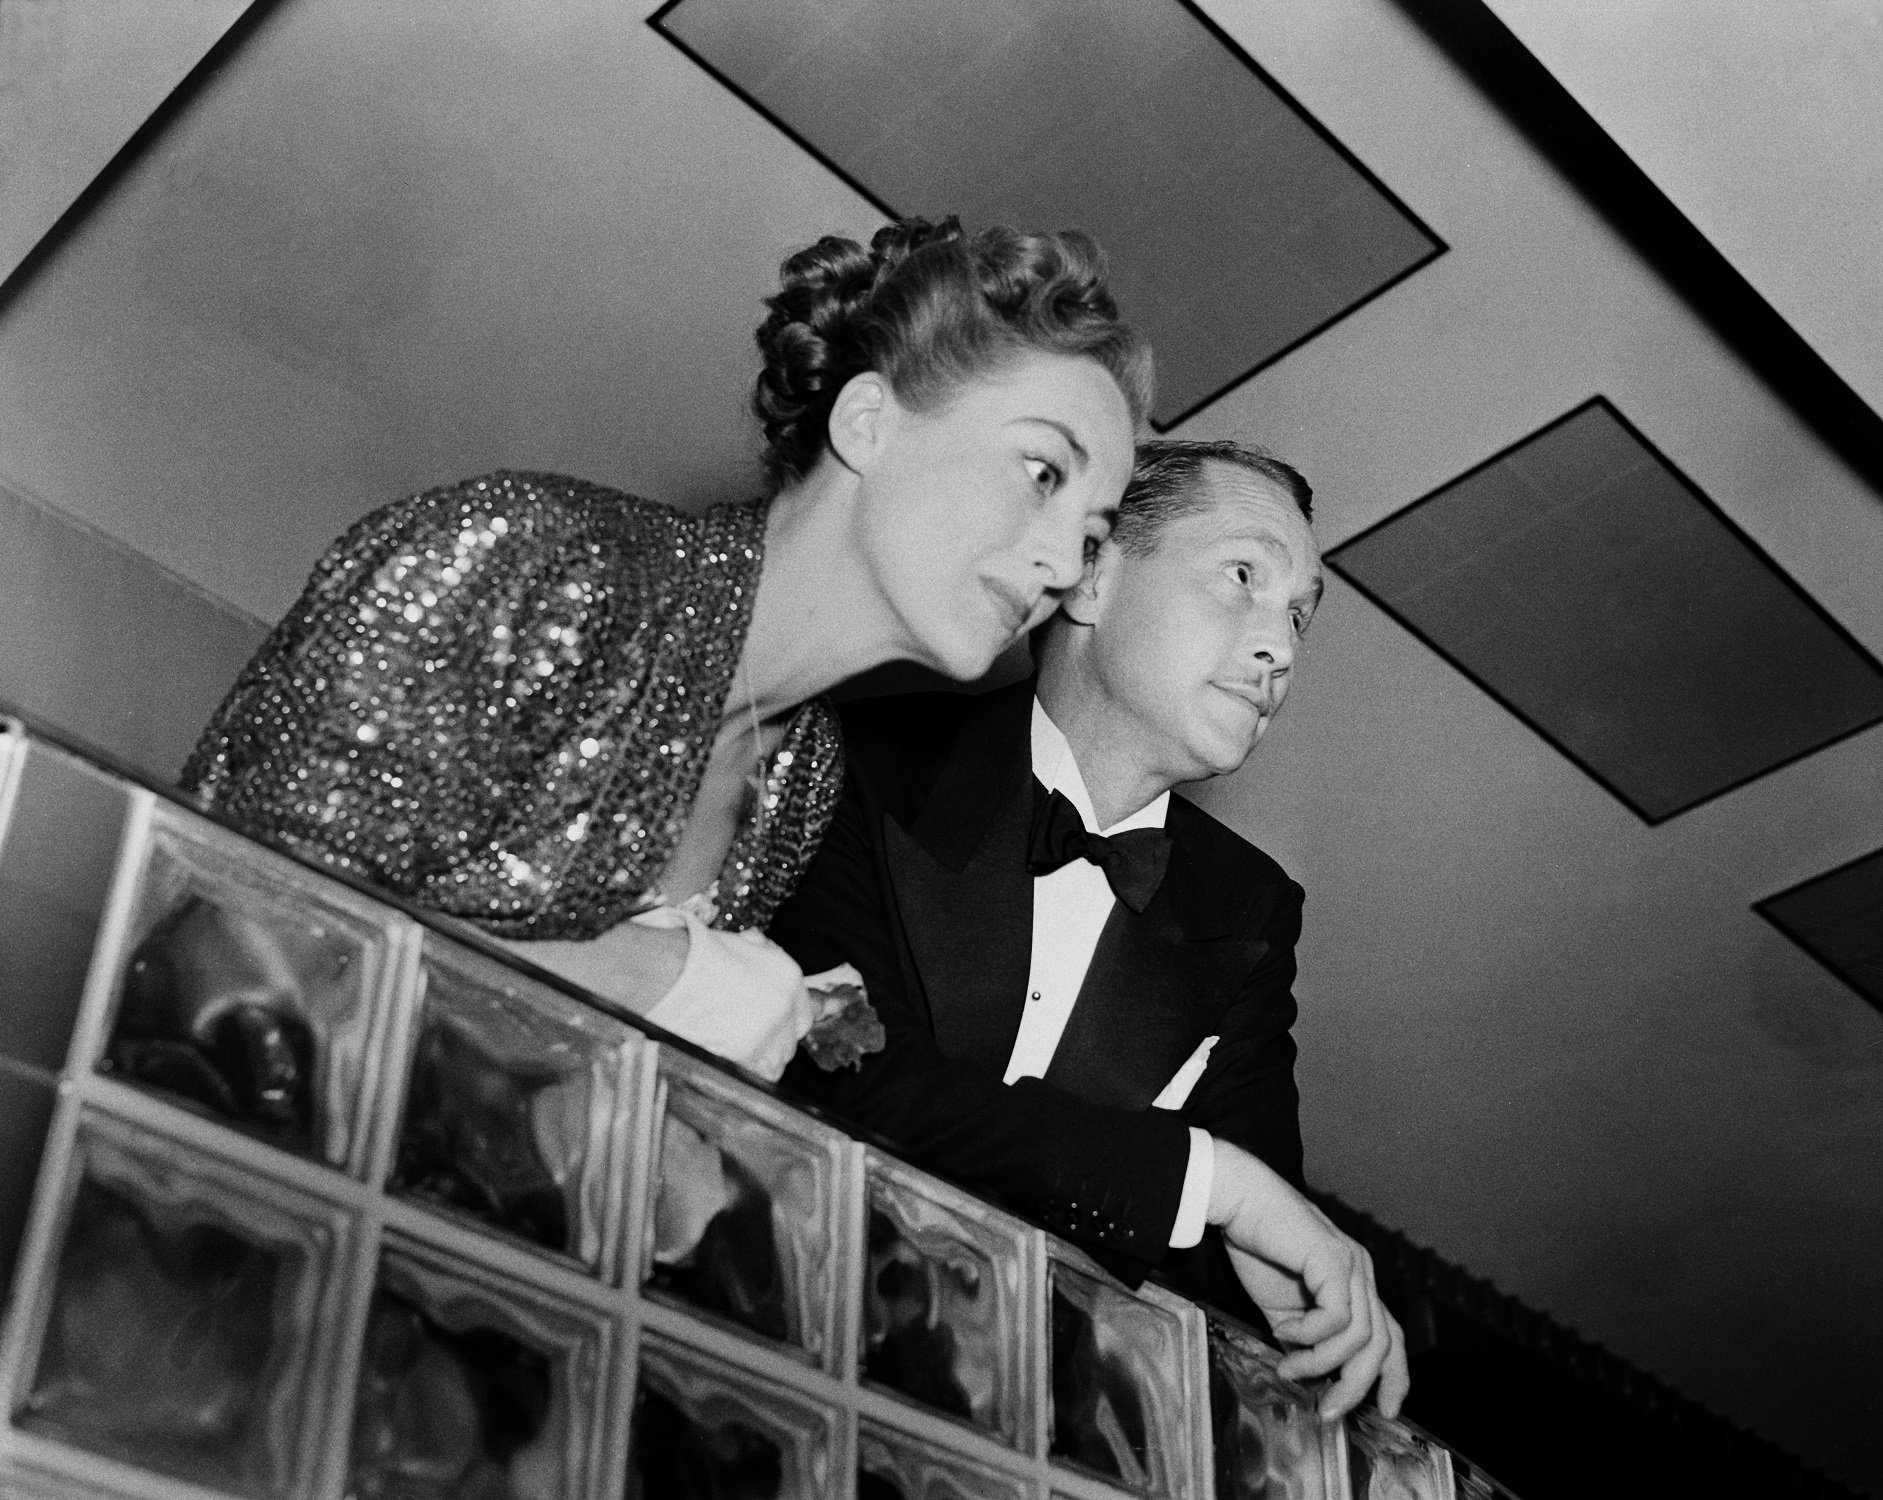 Joan Crawford and Franchot Tone attend an event in Los Angeles, California.